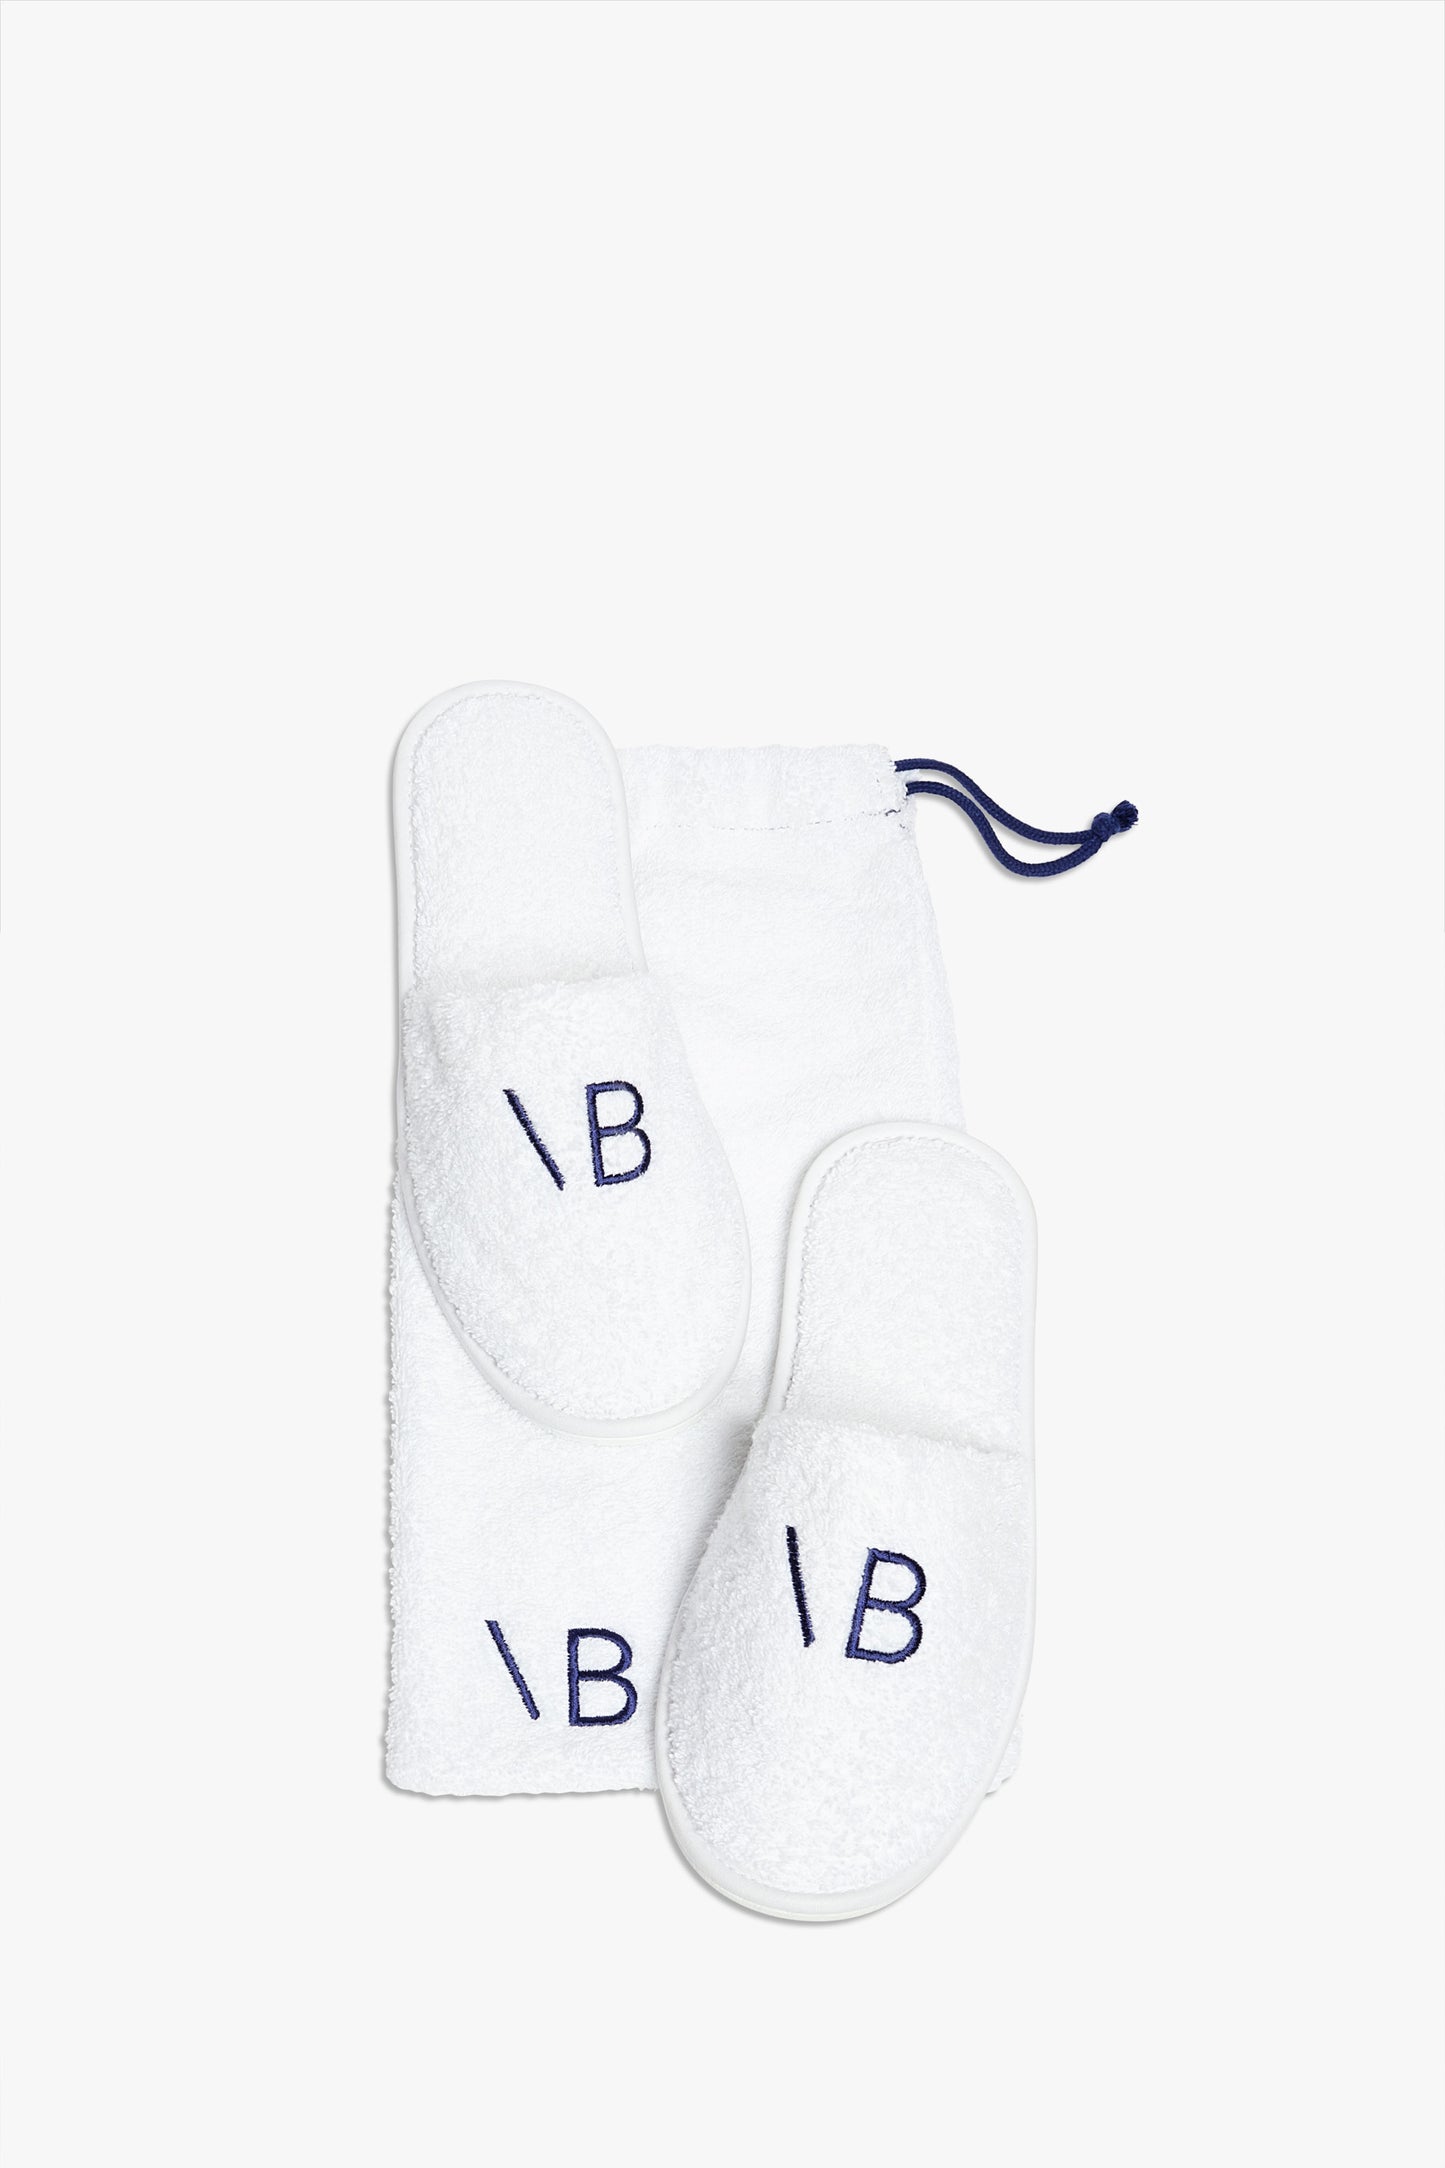 VB Embroidered Slippers In Navy-White